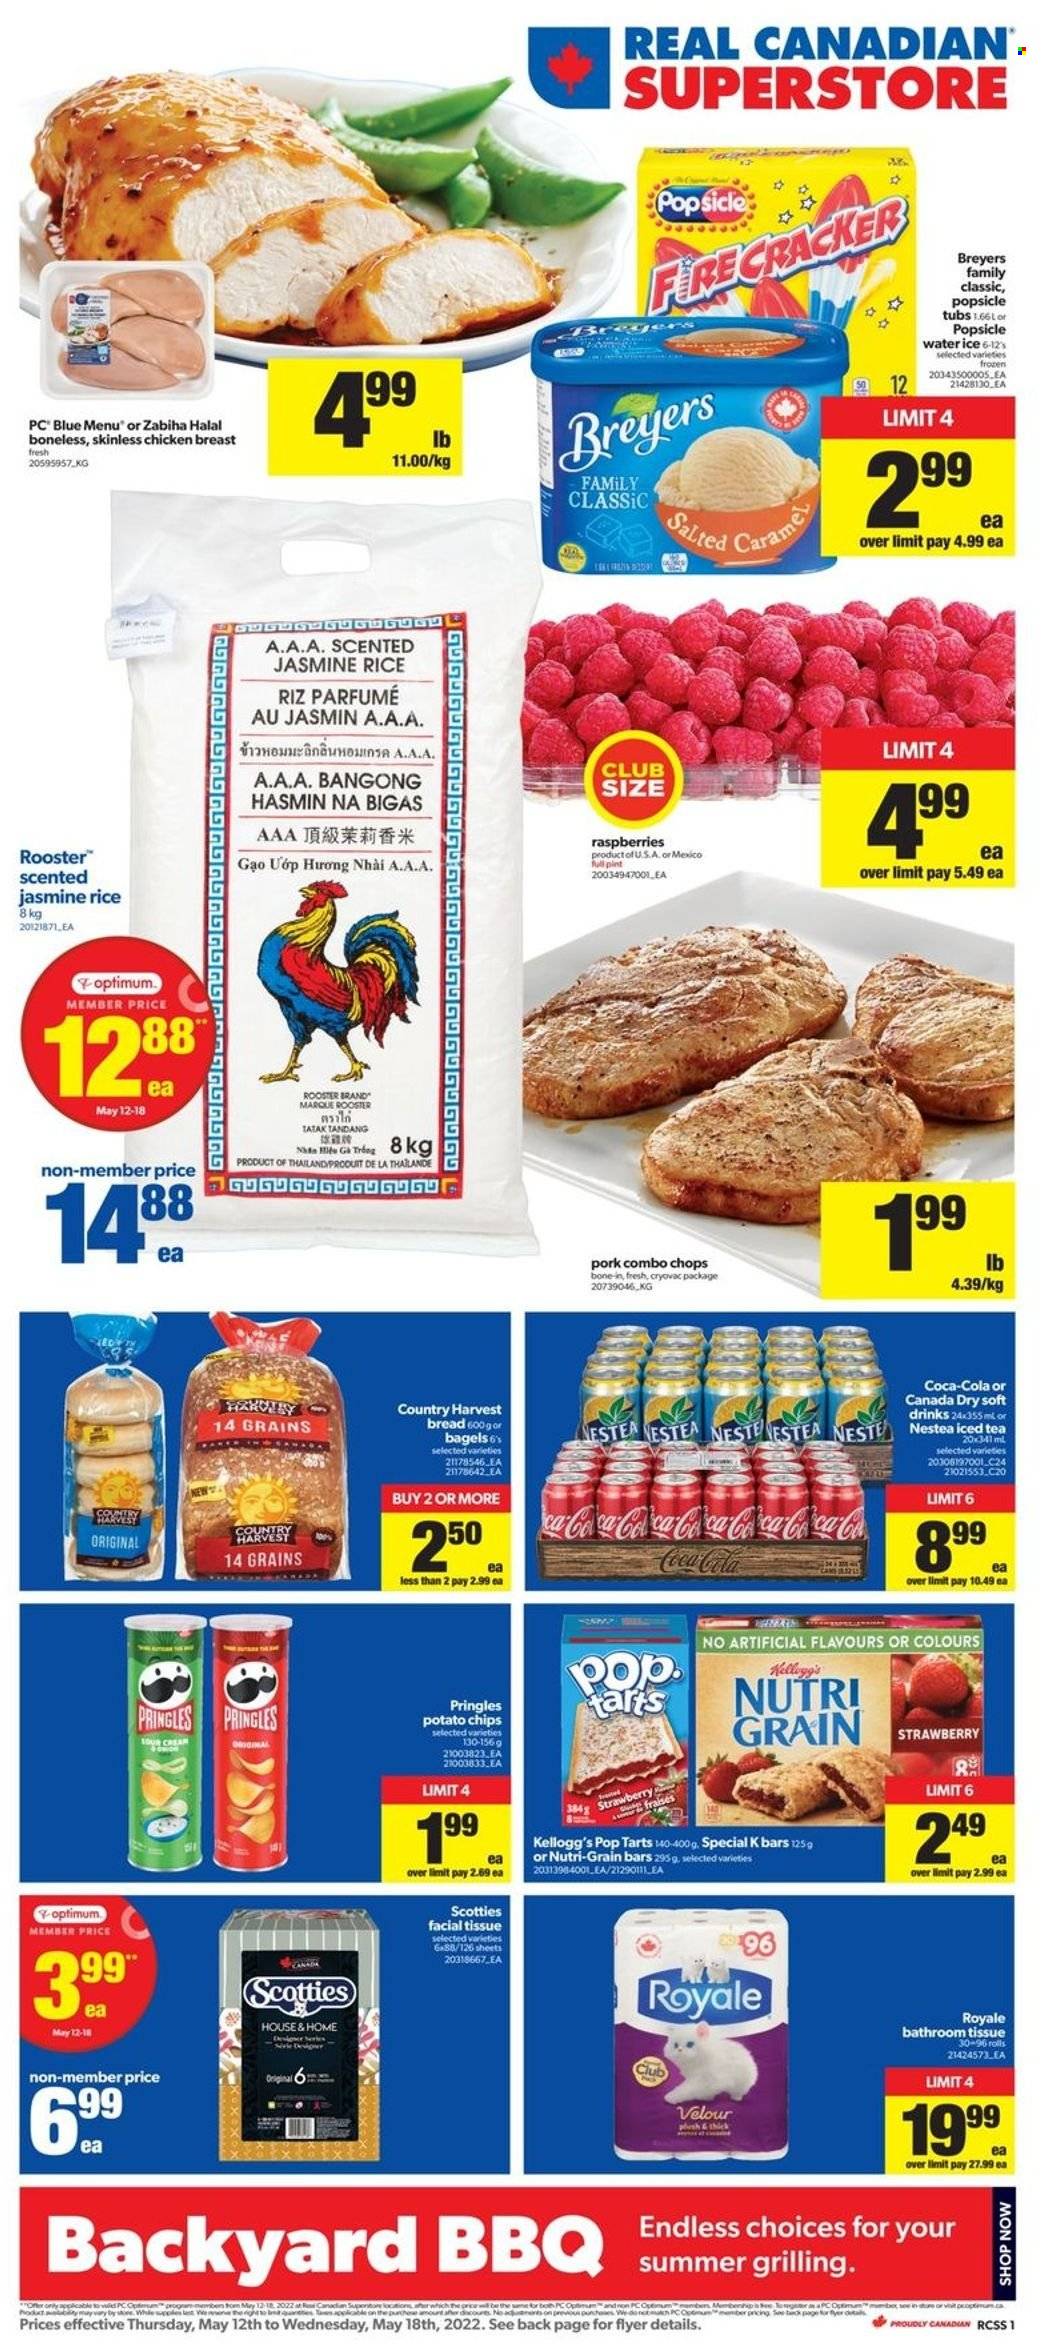 thumbnail - Real Canadian Superstore Flyer - May 12, 2022 - May 18, 2022 - Sales products - bread, Country Harvest, Kellogg's, Pop-Tarts, potato chips, Pringles, Nutri-Grain, rice, jasmine rice, Canada Dry, Coca-Cola, ice tea, soft drink, chicken breasts, chicken, bath tissue, Optimum. Page 1.